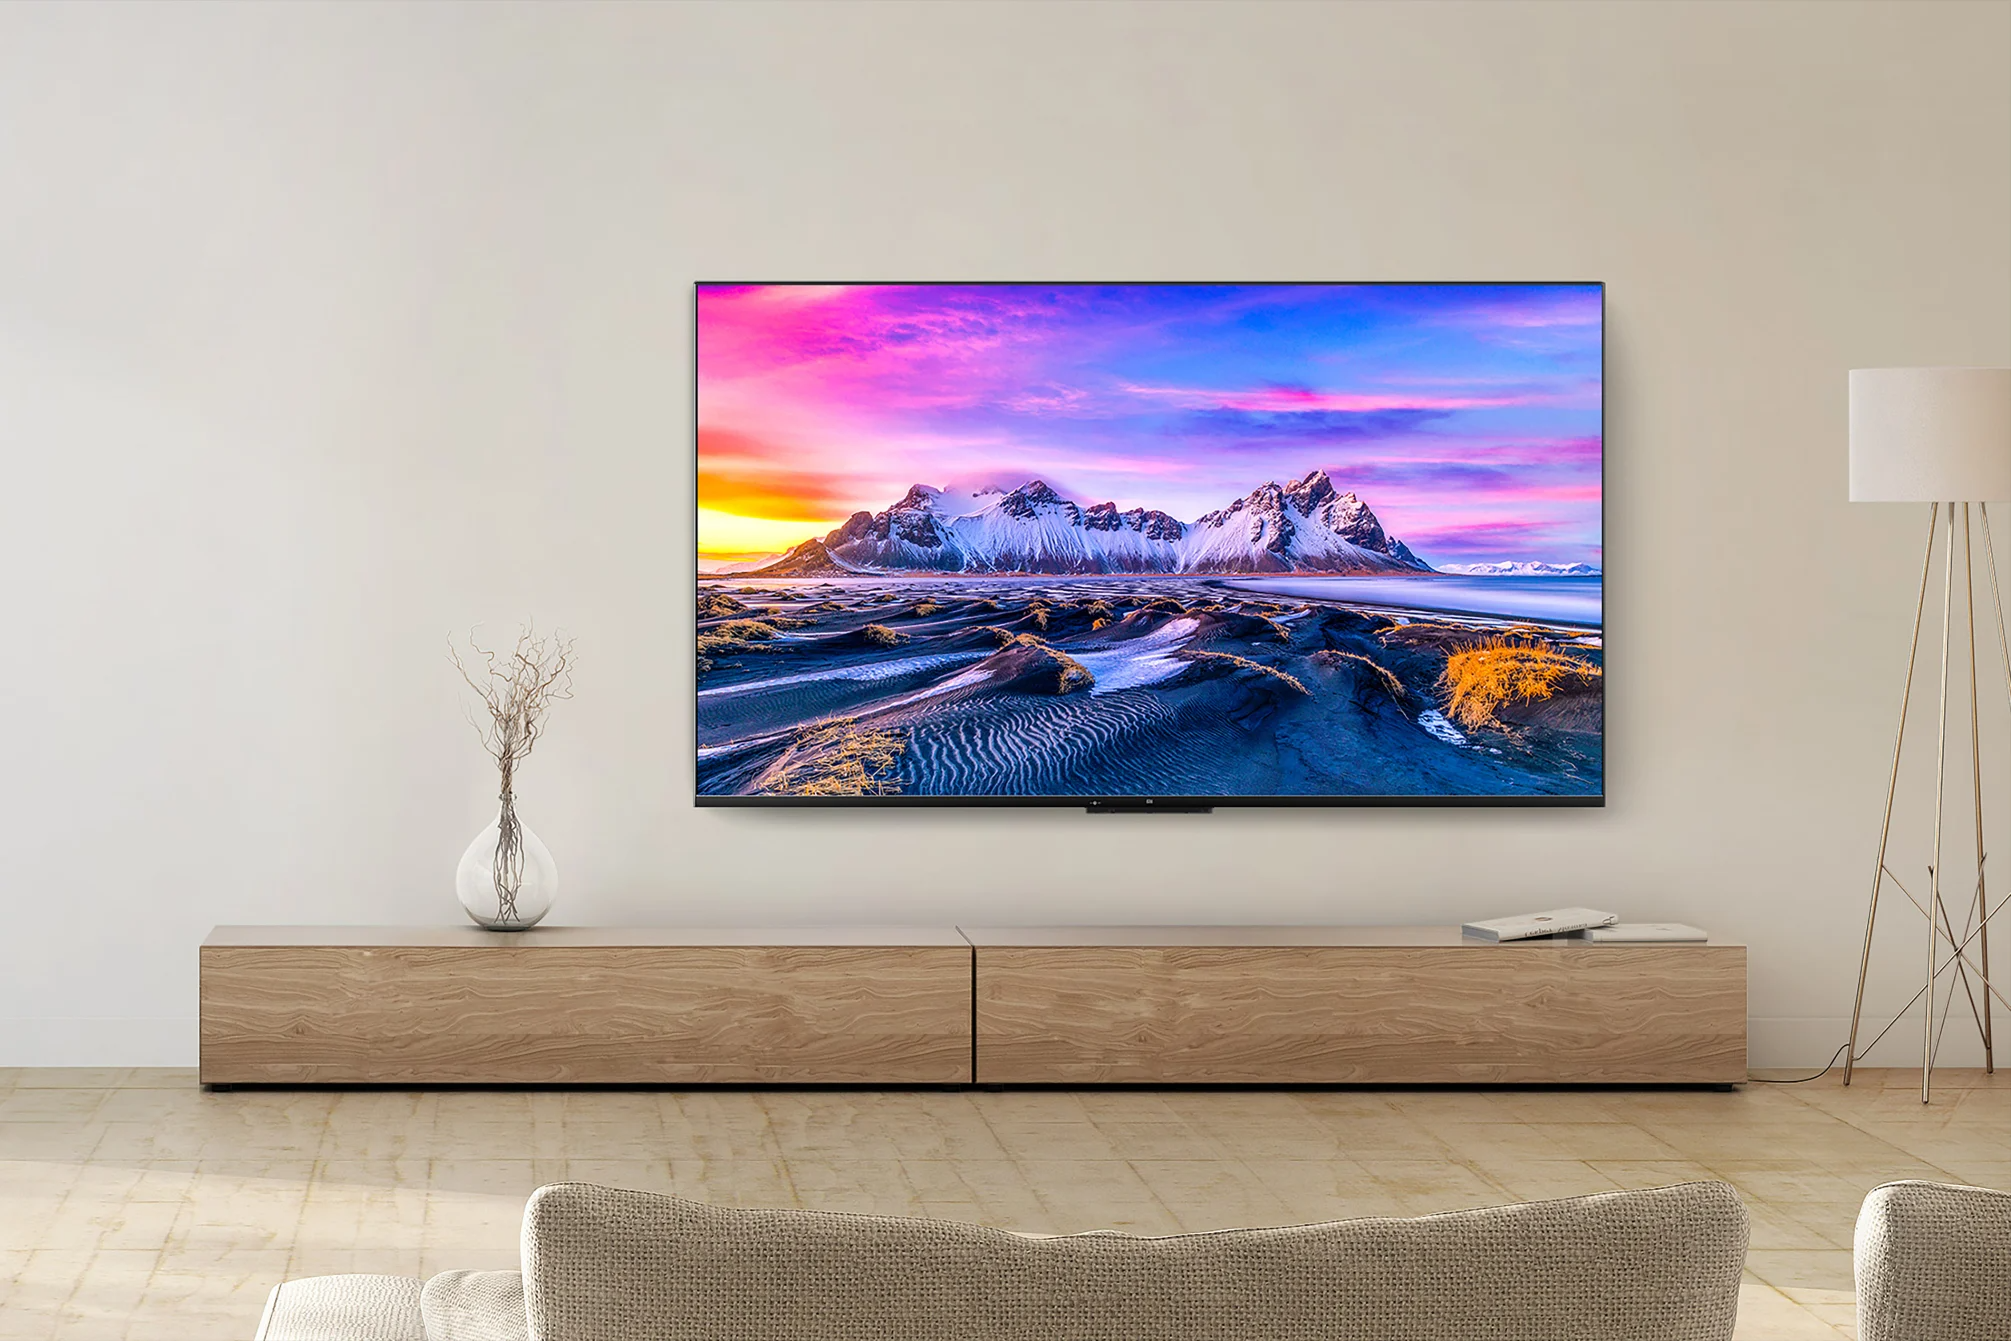 Xiaomi unveils Mi TV S 4K TV with 144Hz refresh rate and HDMI 2.1, starting at $435